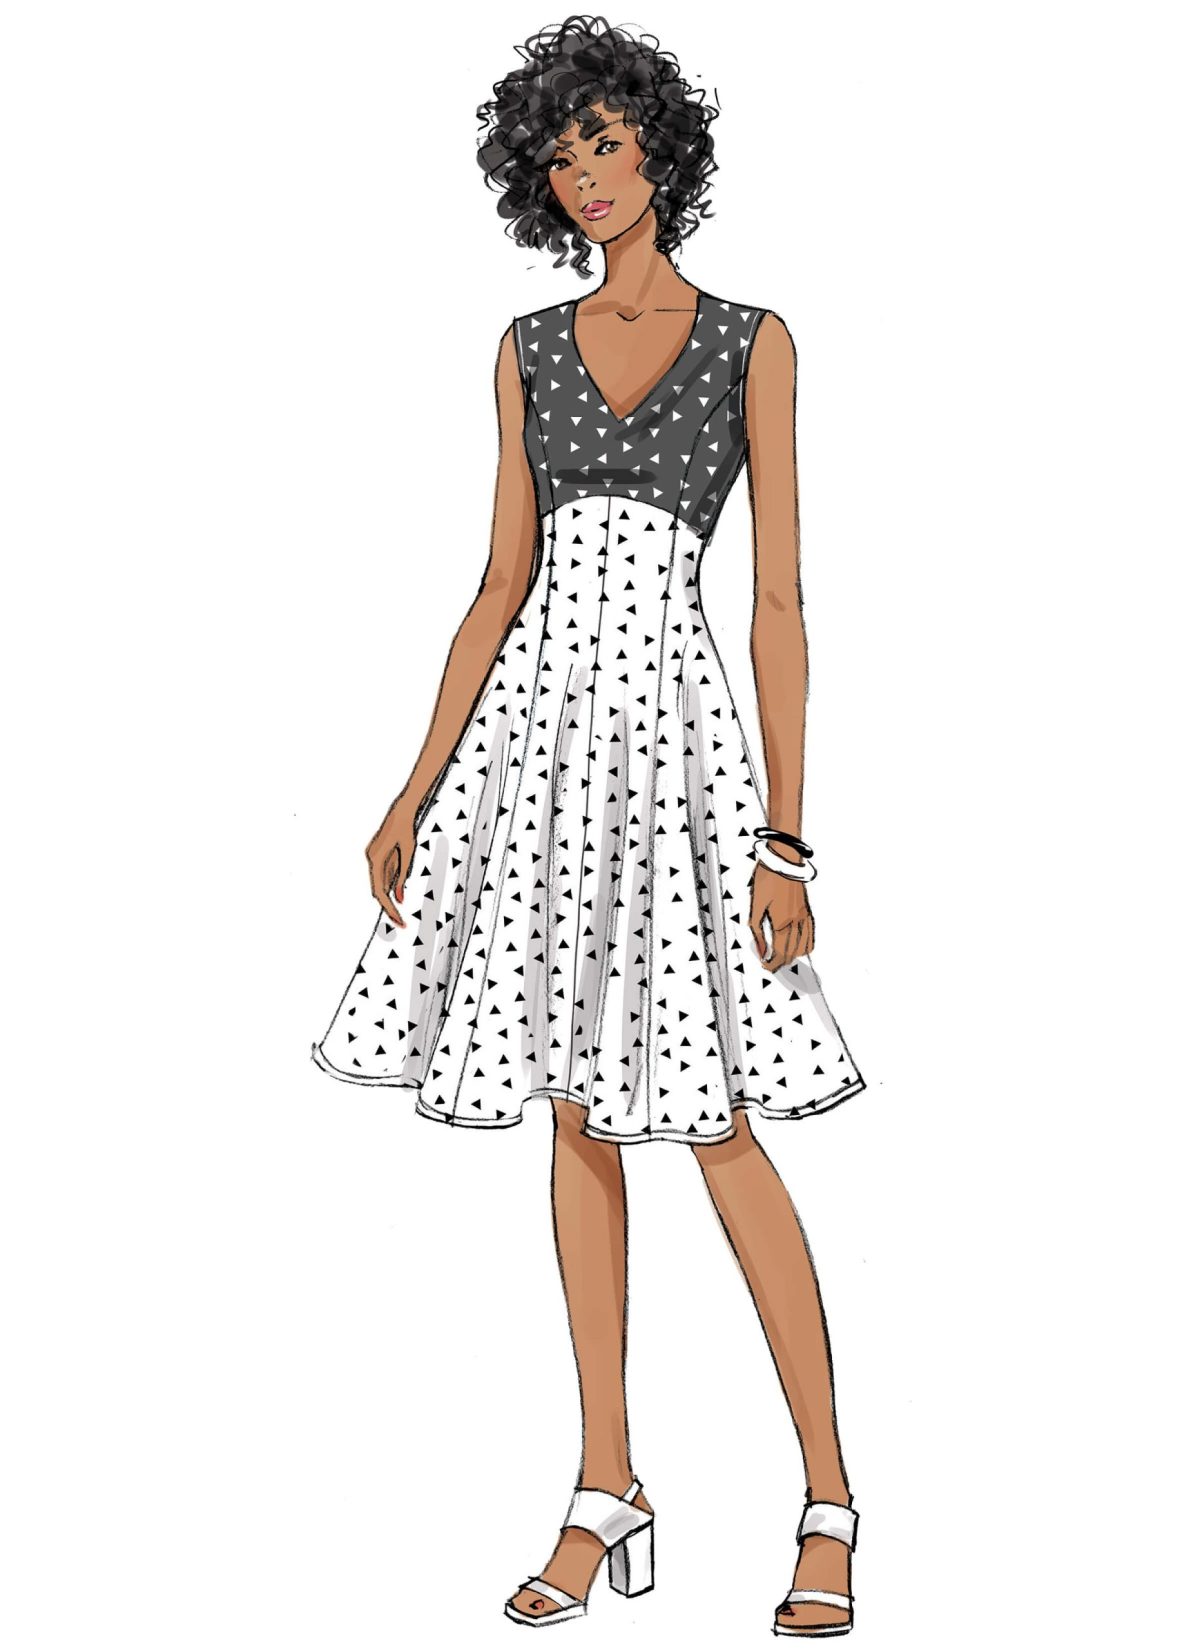 Butterick Sewing Pattern B6448 Misses' Fit-and-Flare, Empire-Waist Dresses